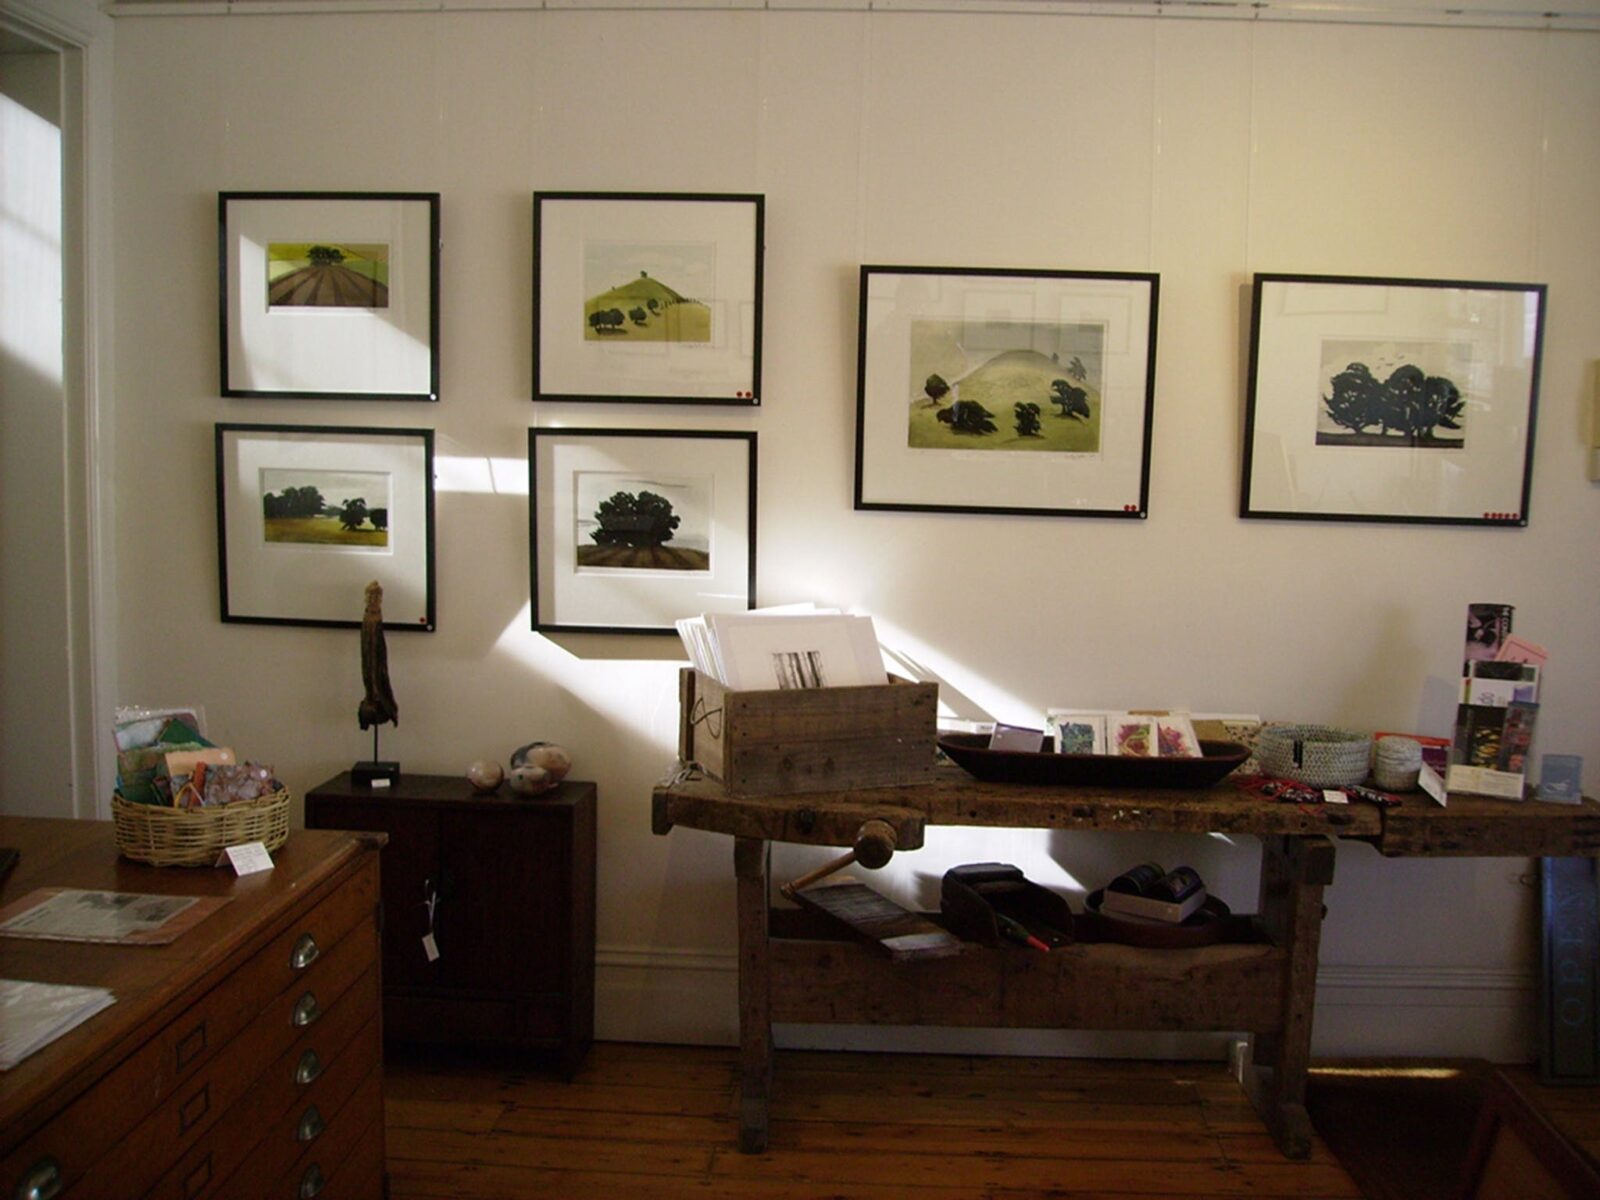 Exhibition:'Lay of the Land', Carolyn Graham, 2009, Linocuts